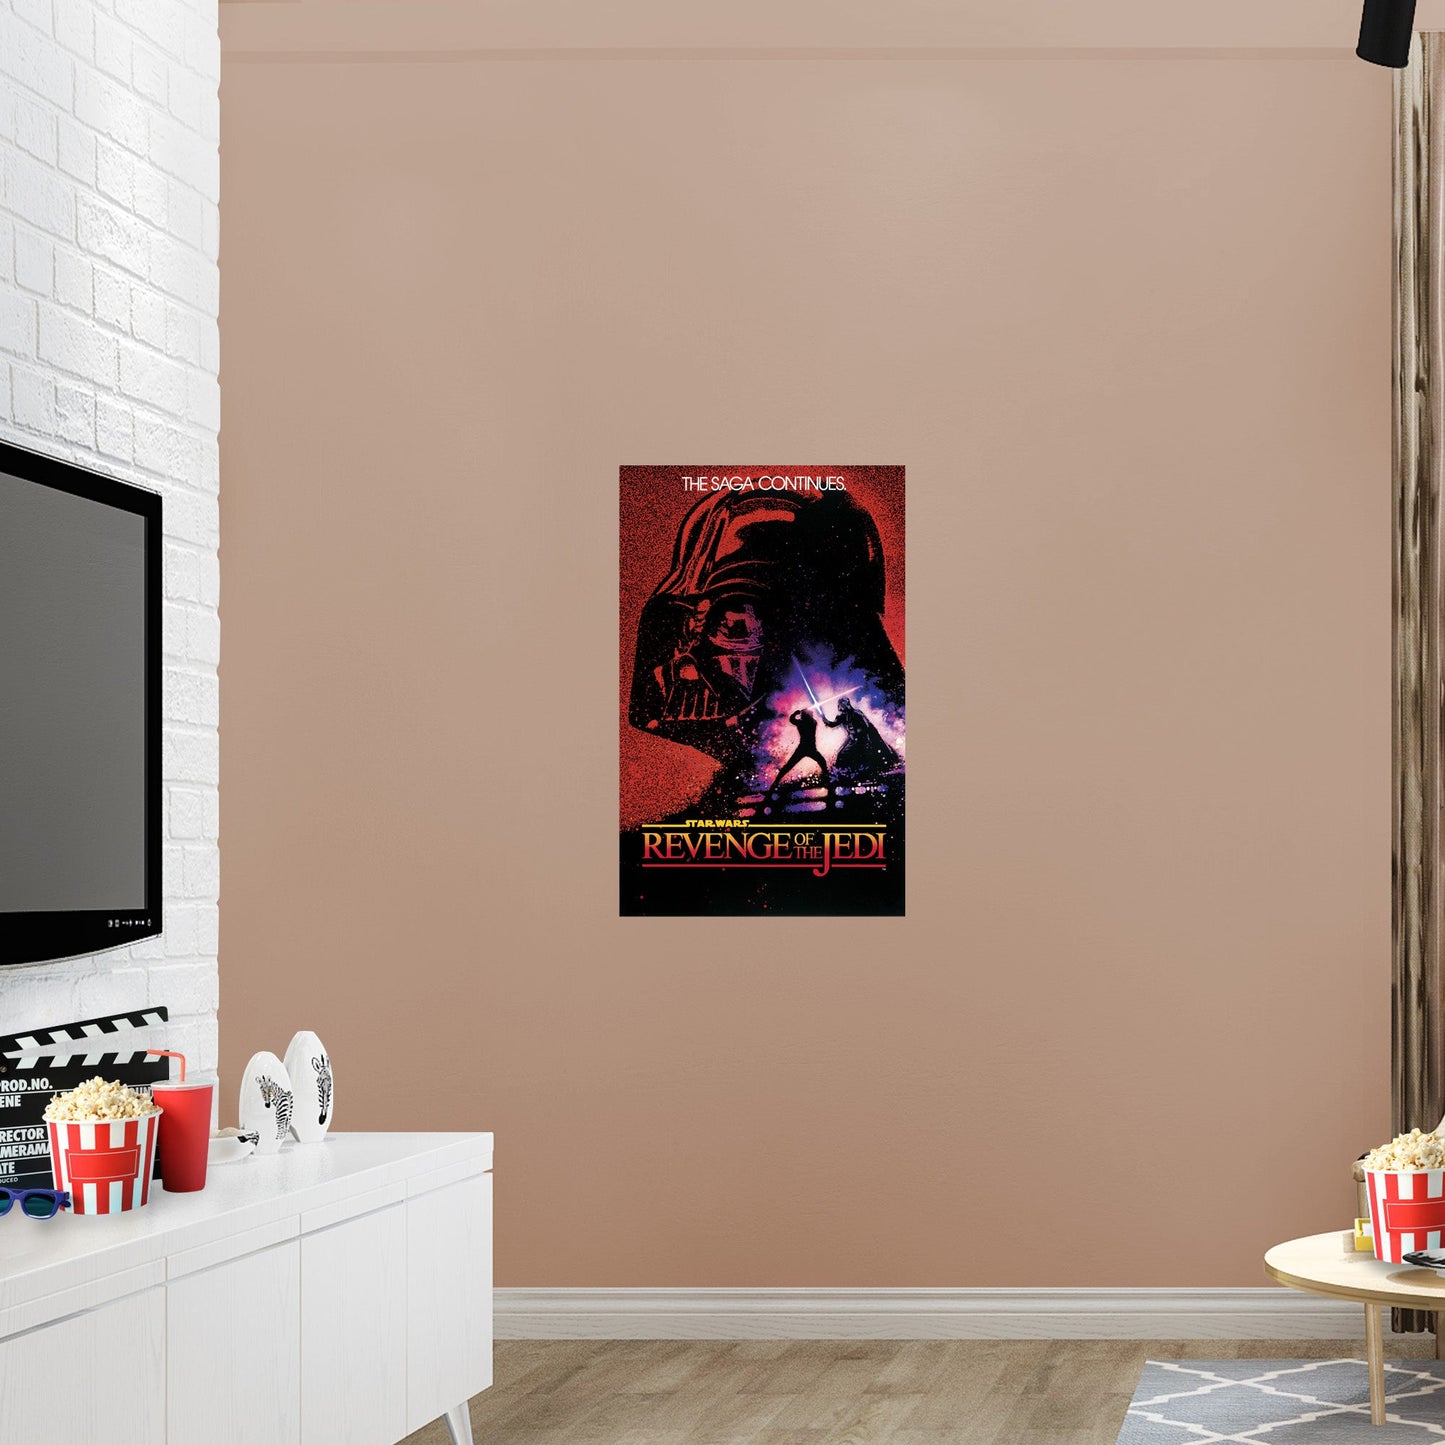 Return of the Jedi 40th: Revenge of the Jedi Movie Poster - Officially Licensed Star Wars Removable Adhesive Decal